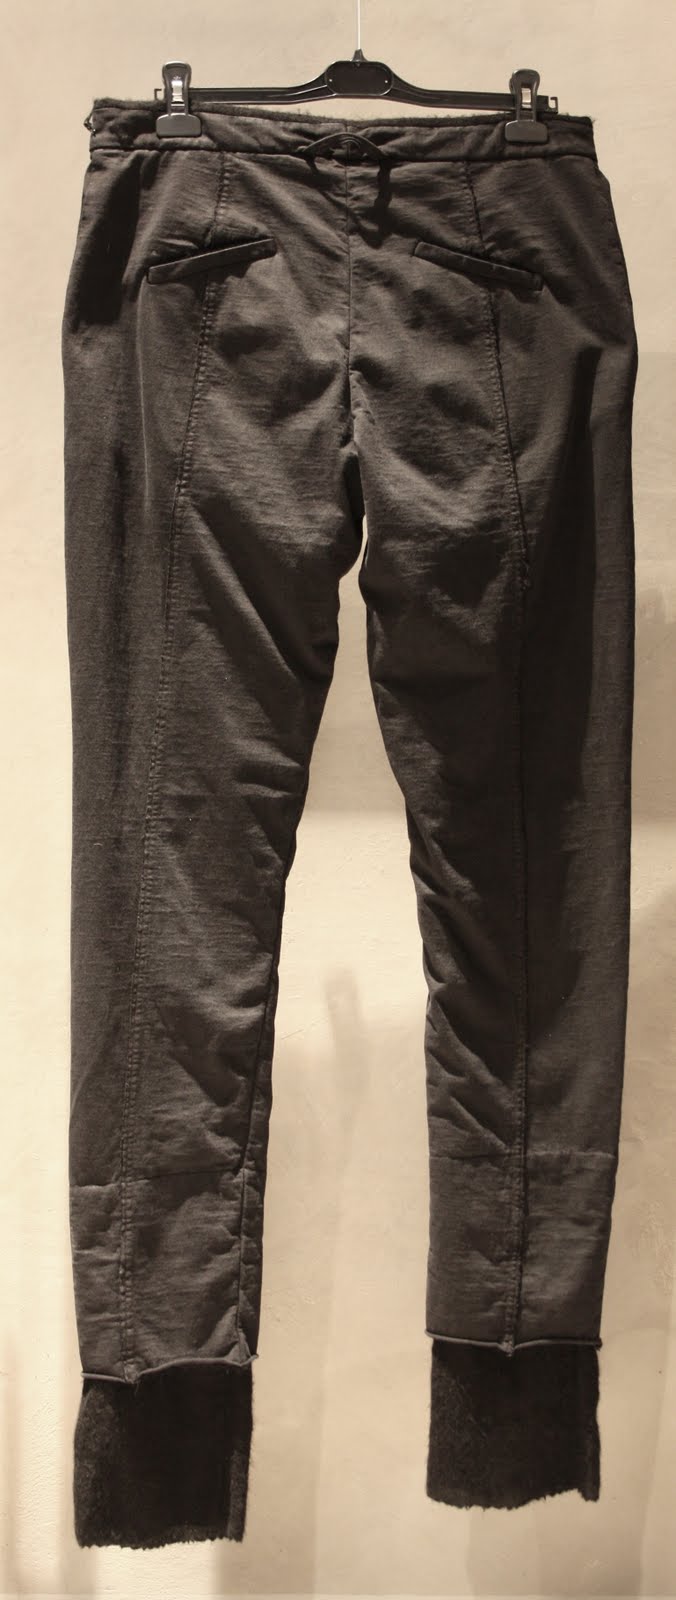 Lost & Found FW 11-12 Cotton Pants with Wool Detail